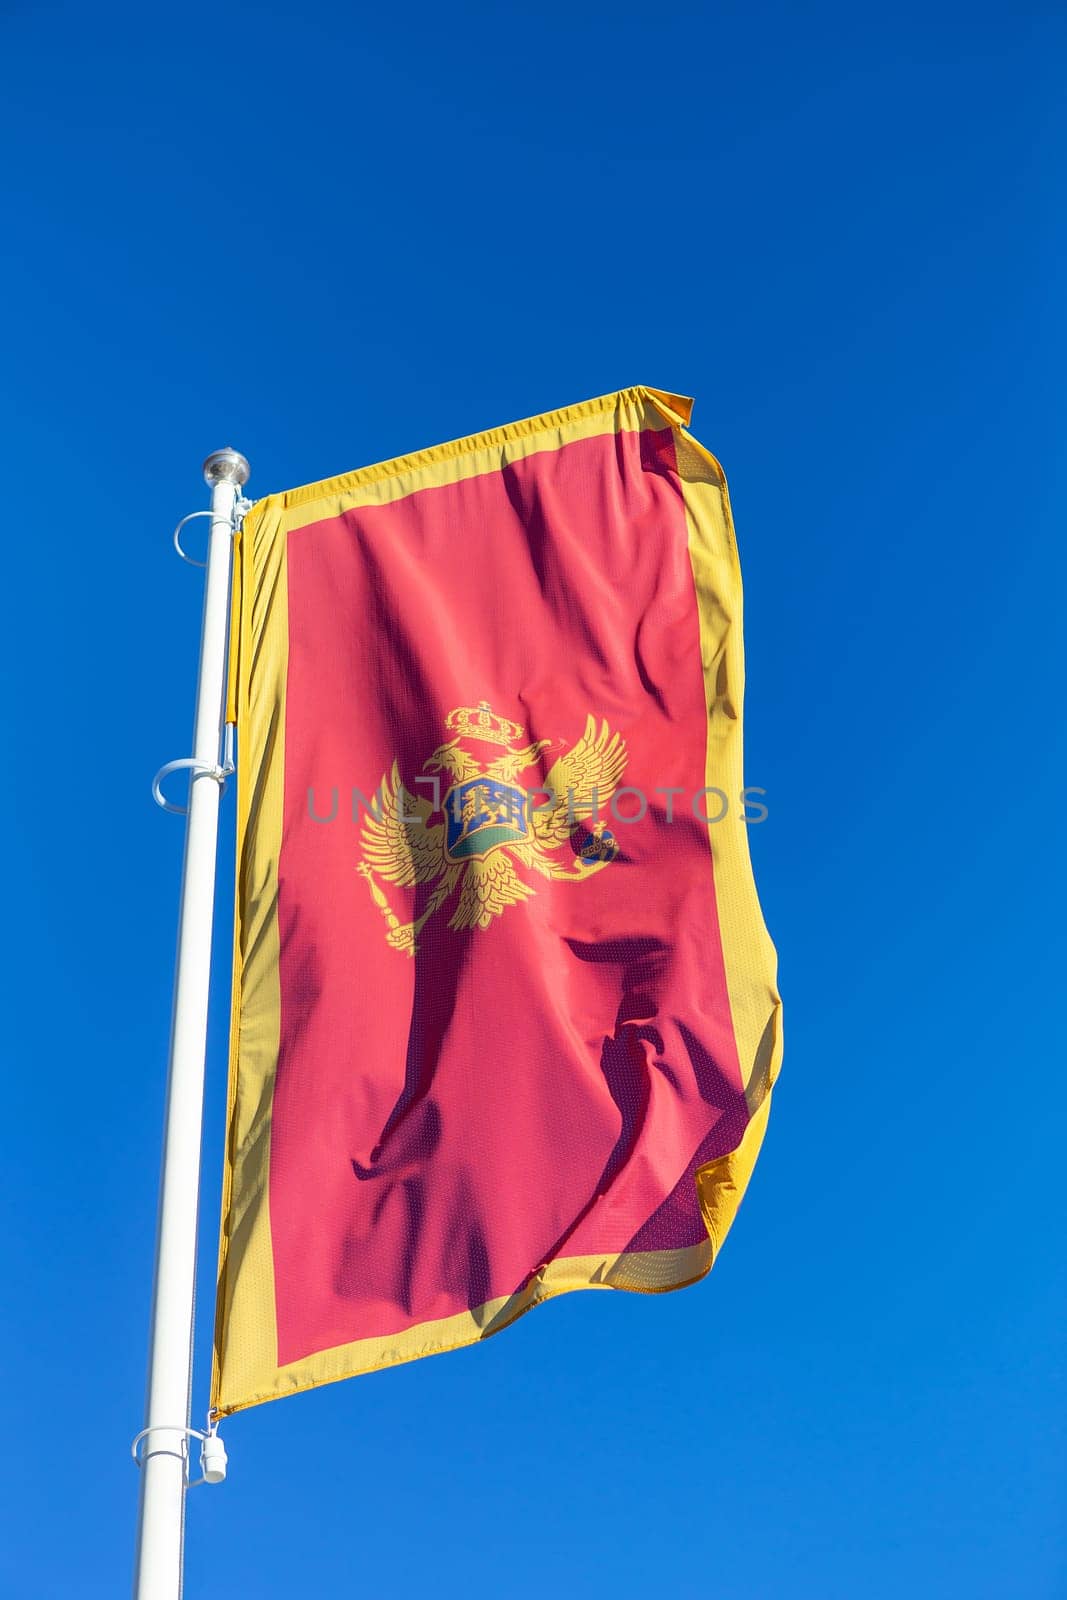 The flag of montenegro develops in a blue and clear sky. The national flag is one of the symbols of the state